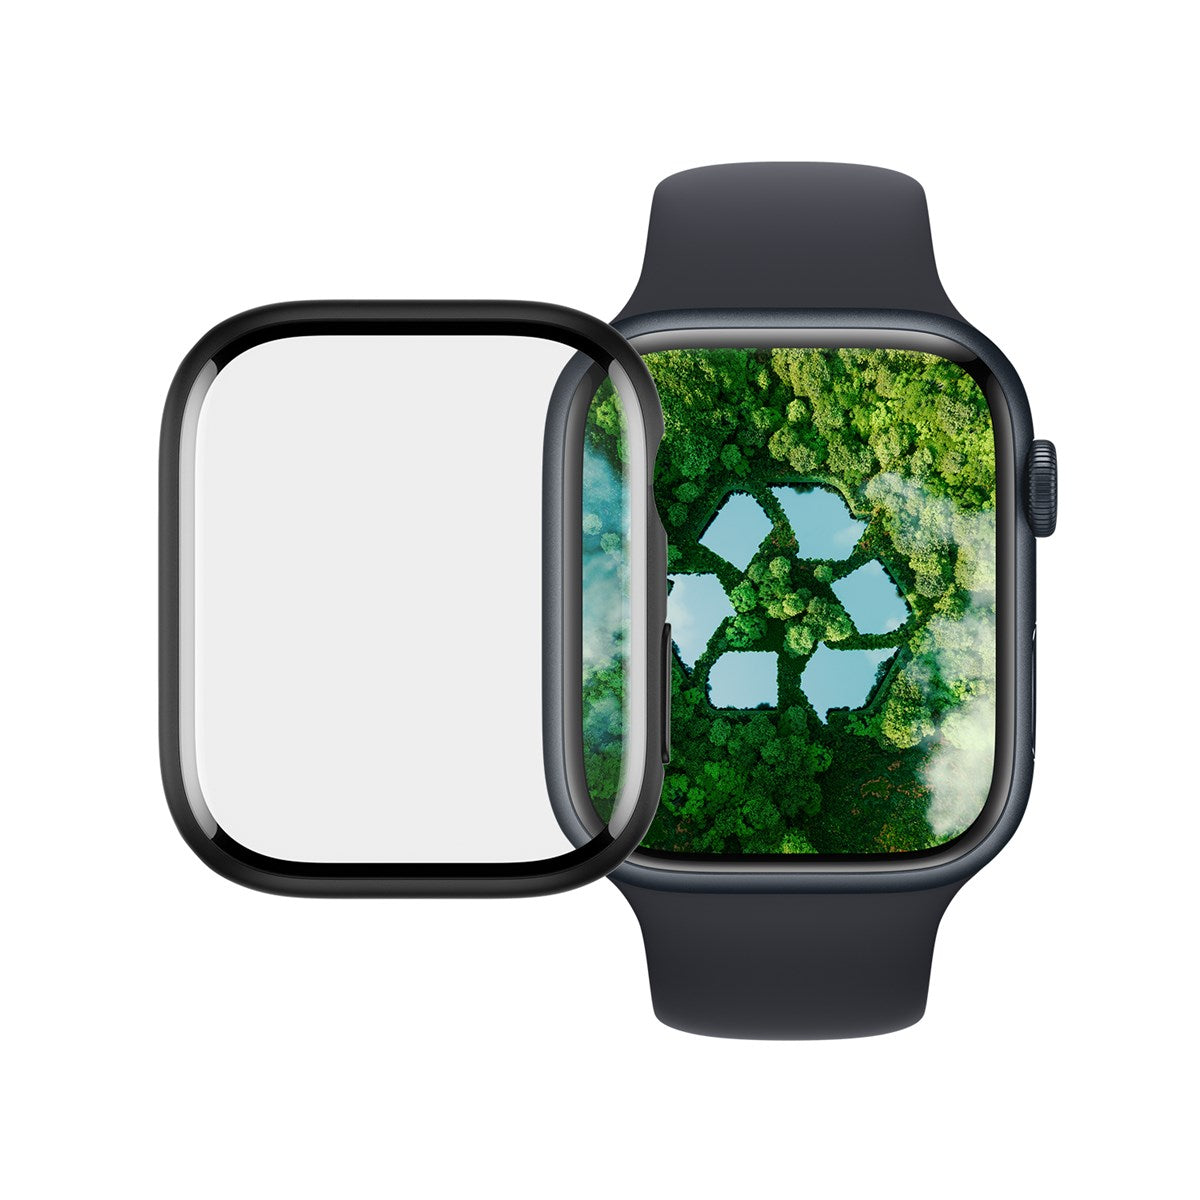 Upcycle by PanzerGlass Full Body Screen Protector Glass For Apple Watch Series 8 | 7 | 45mm